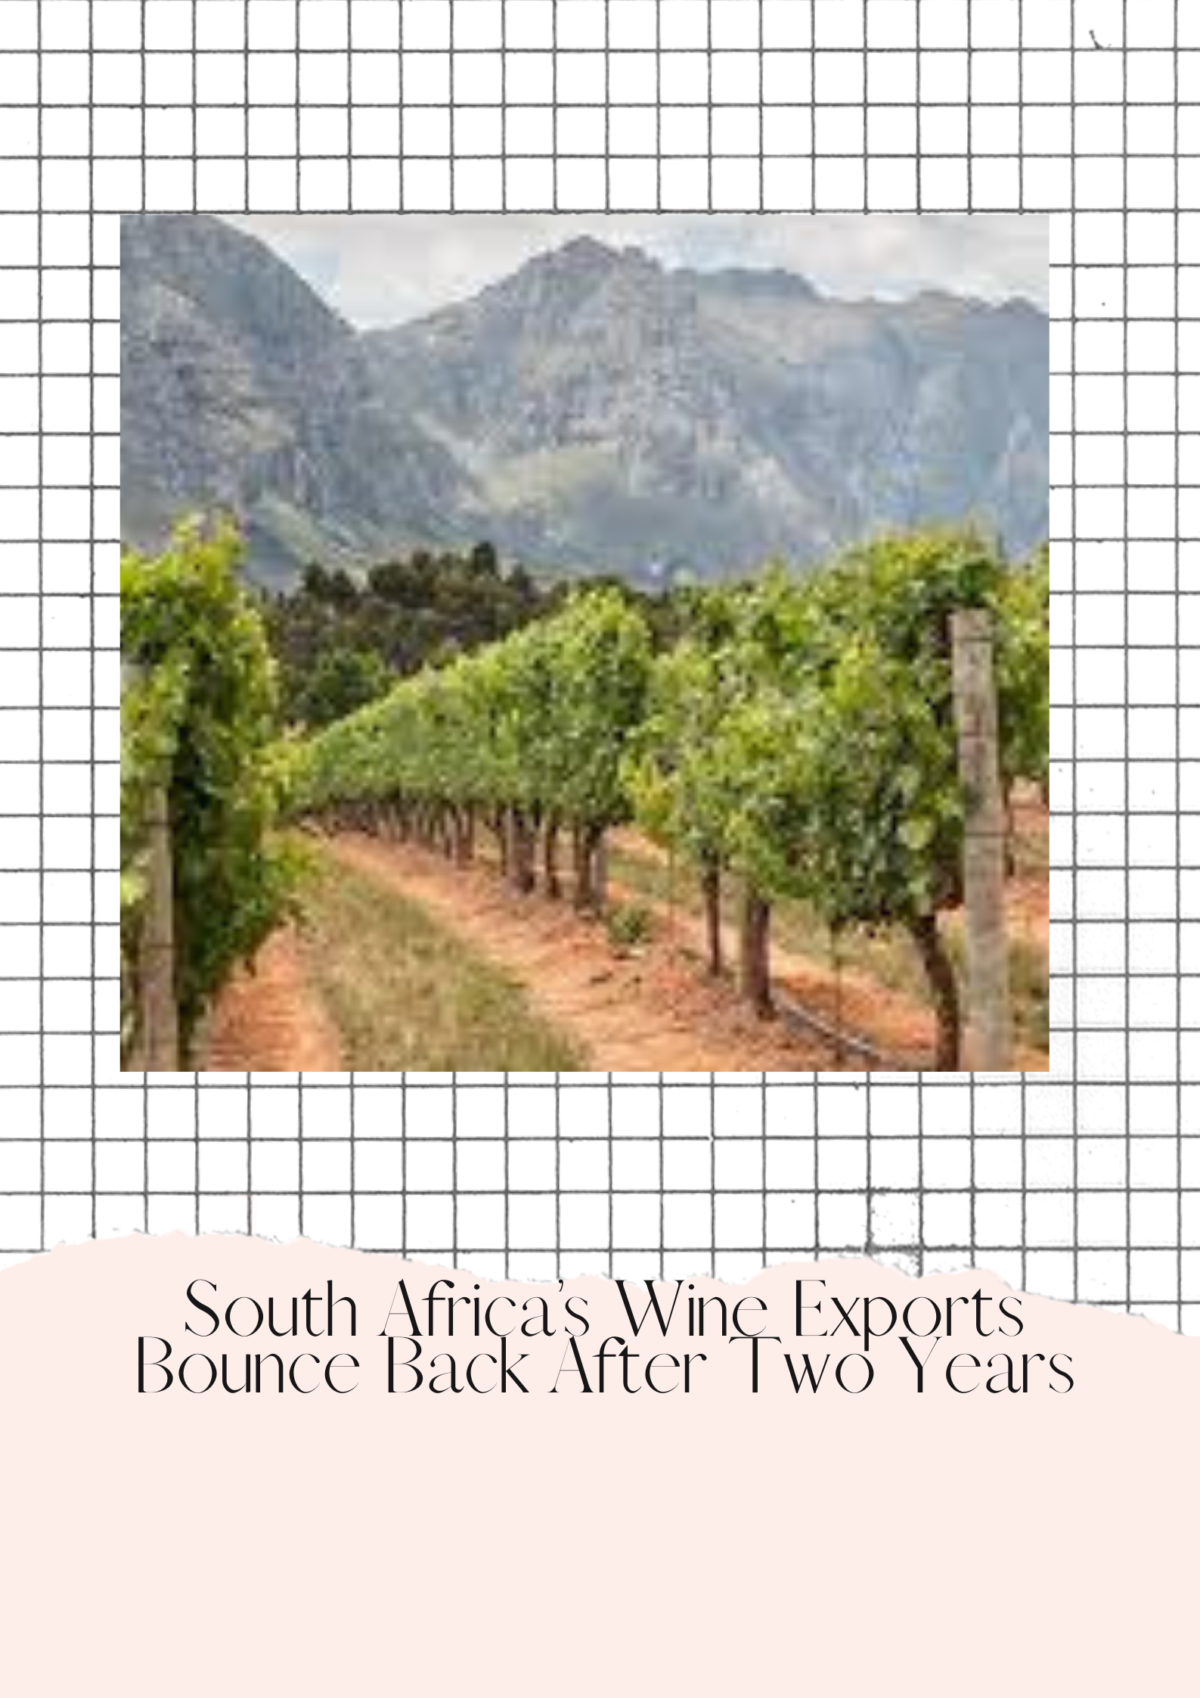 South Africa’s Wine Exports Bounce Back After Two Years